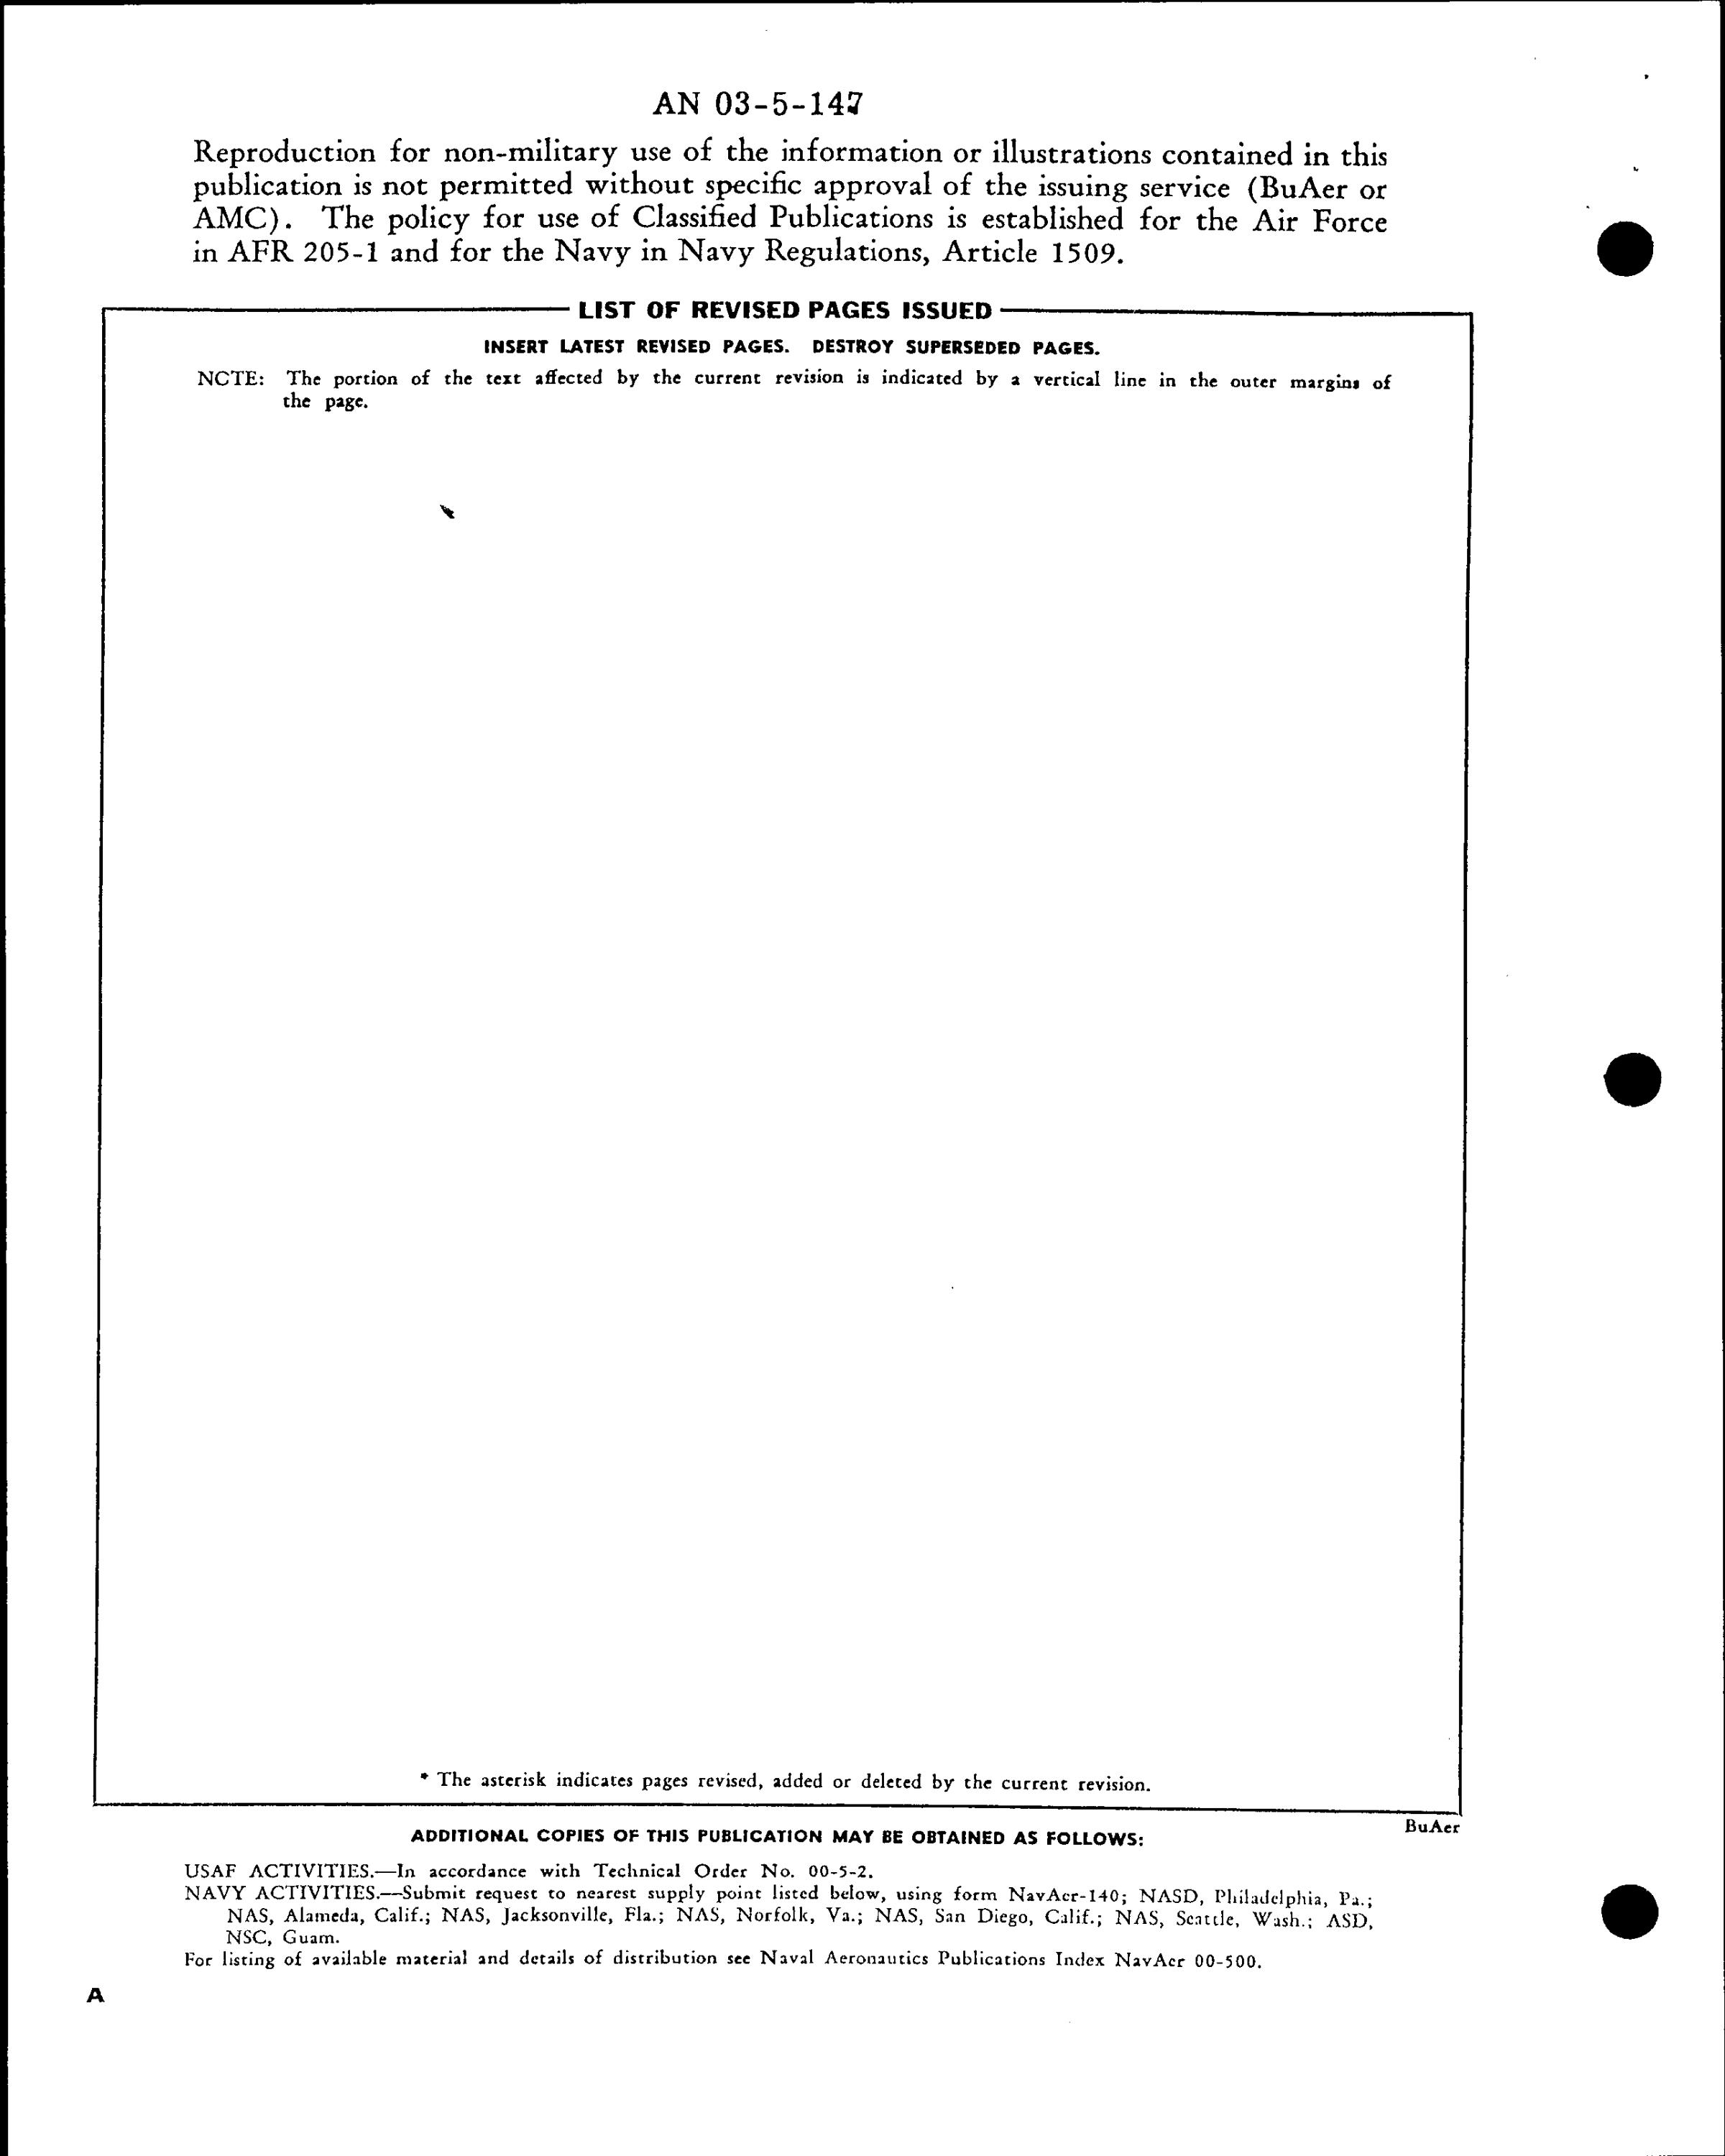 Sample page 2 from AirCorps Library document: Parts Catalog for Differential Pressure Switch (McQuay-Norris)